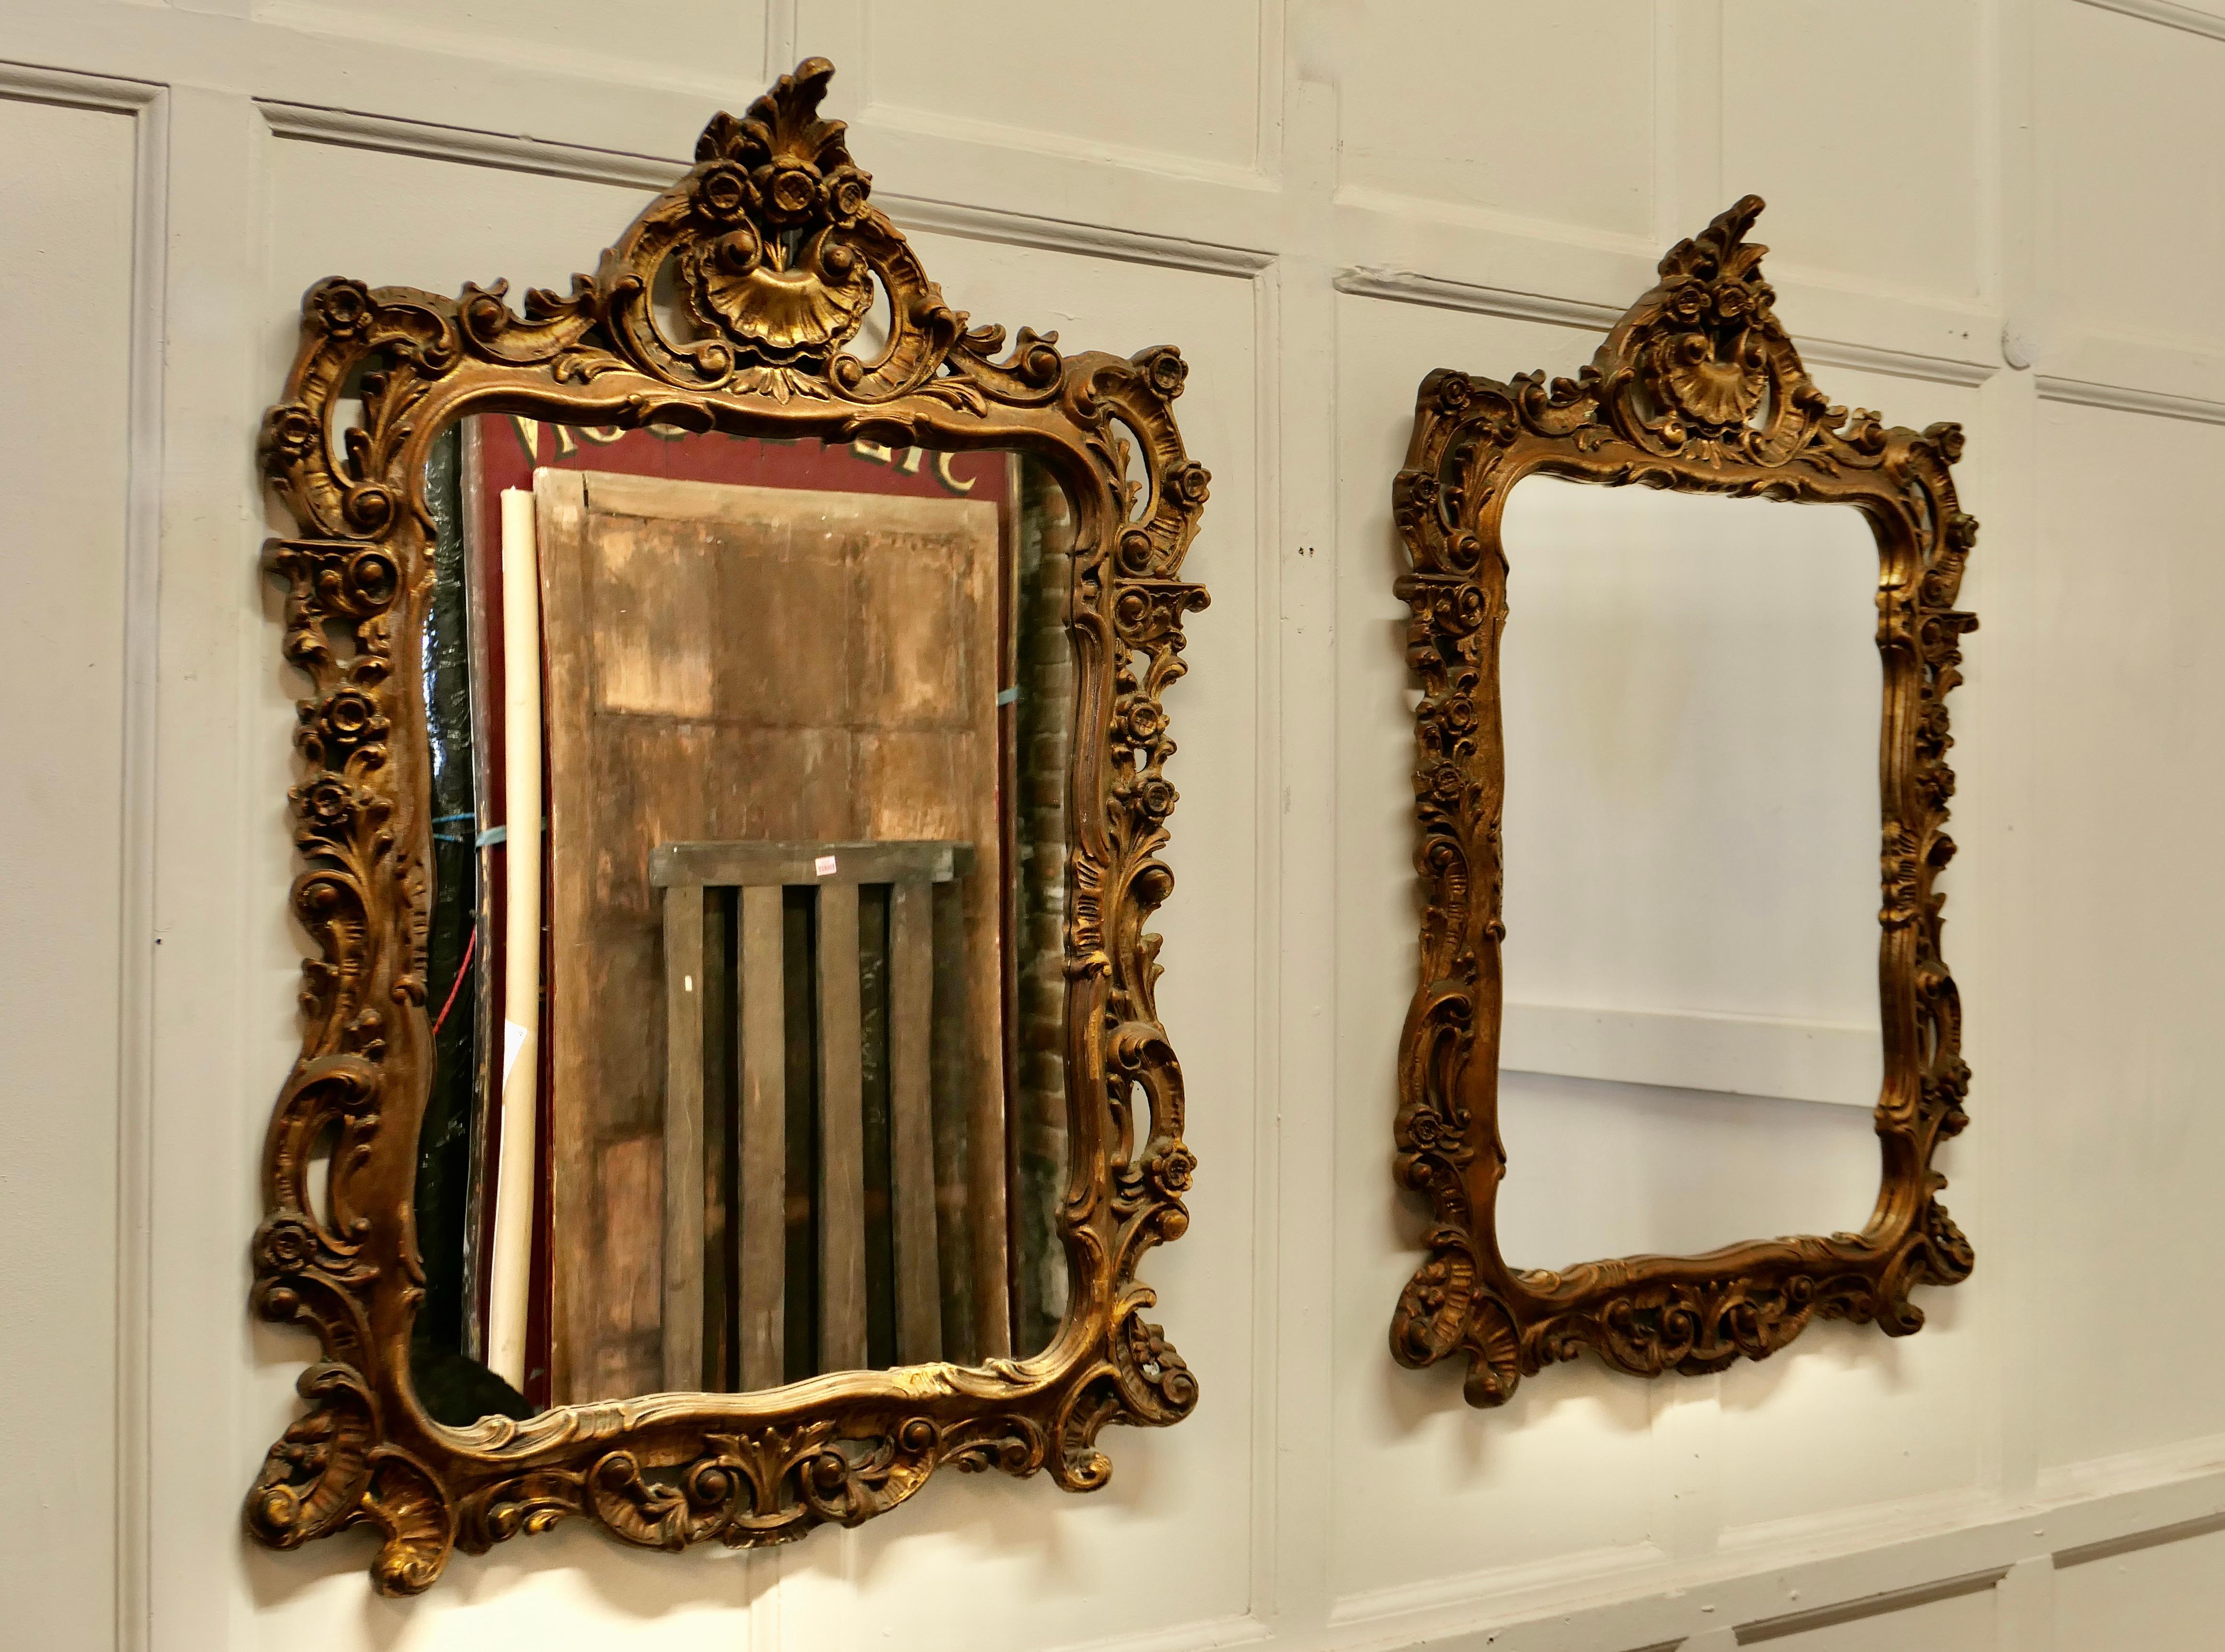 Pair of 19th Century French Gilt mirrors

These are a beautiful Pair of old Gold Framed Mirrors, the mirrors have a tall pediment with shell decoration at the top and gilded carving, around the rest of the 4” wide frame 
The mirrors are in good